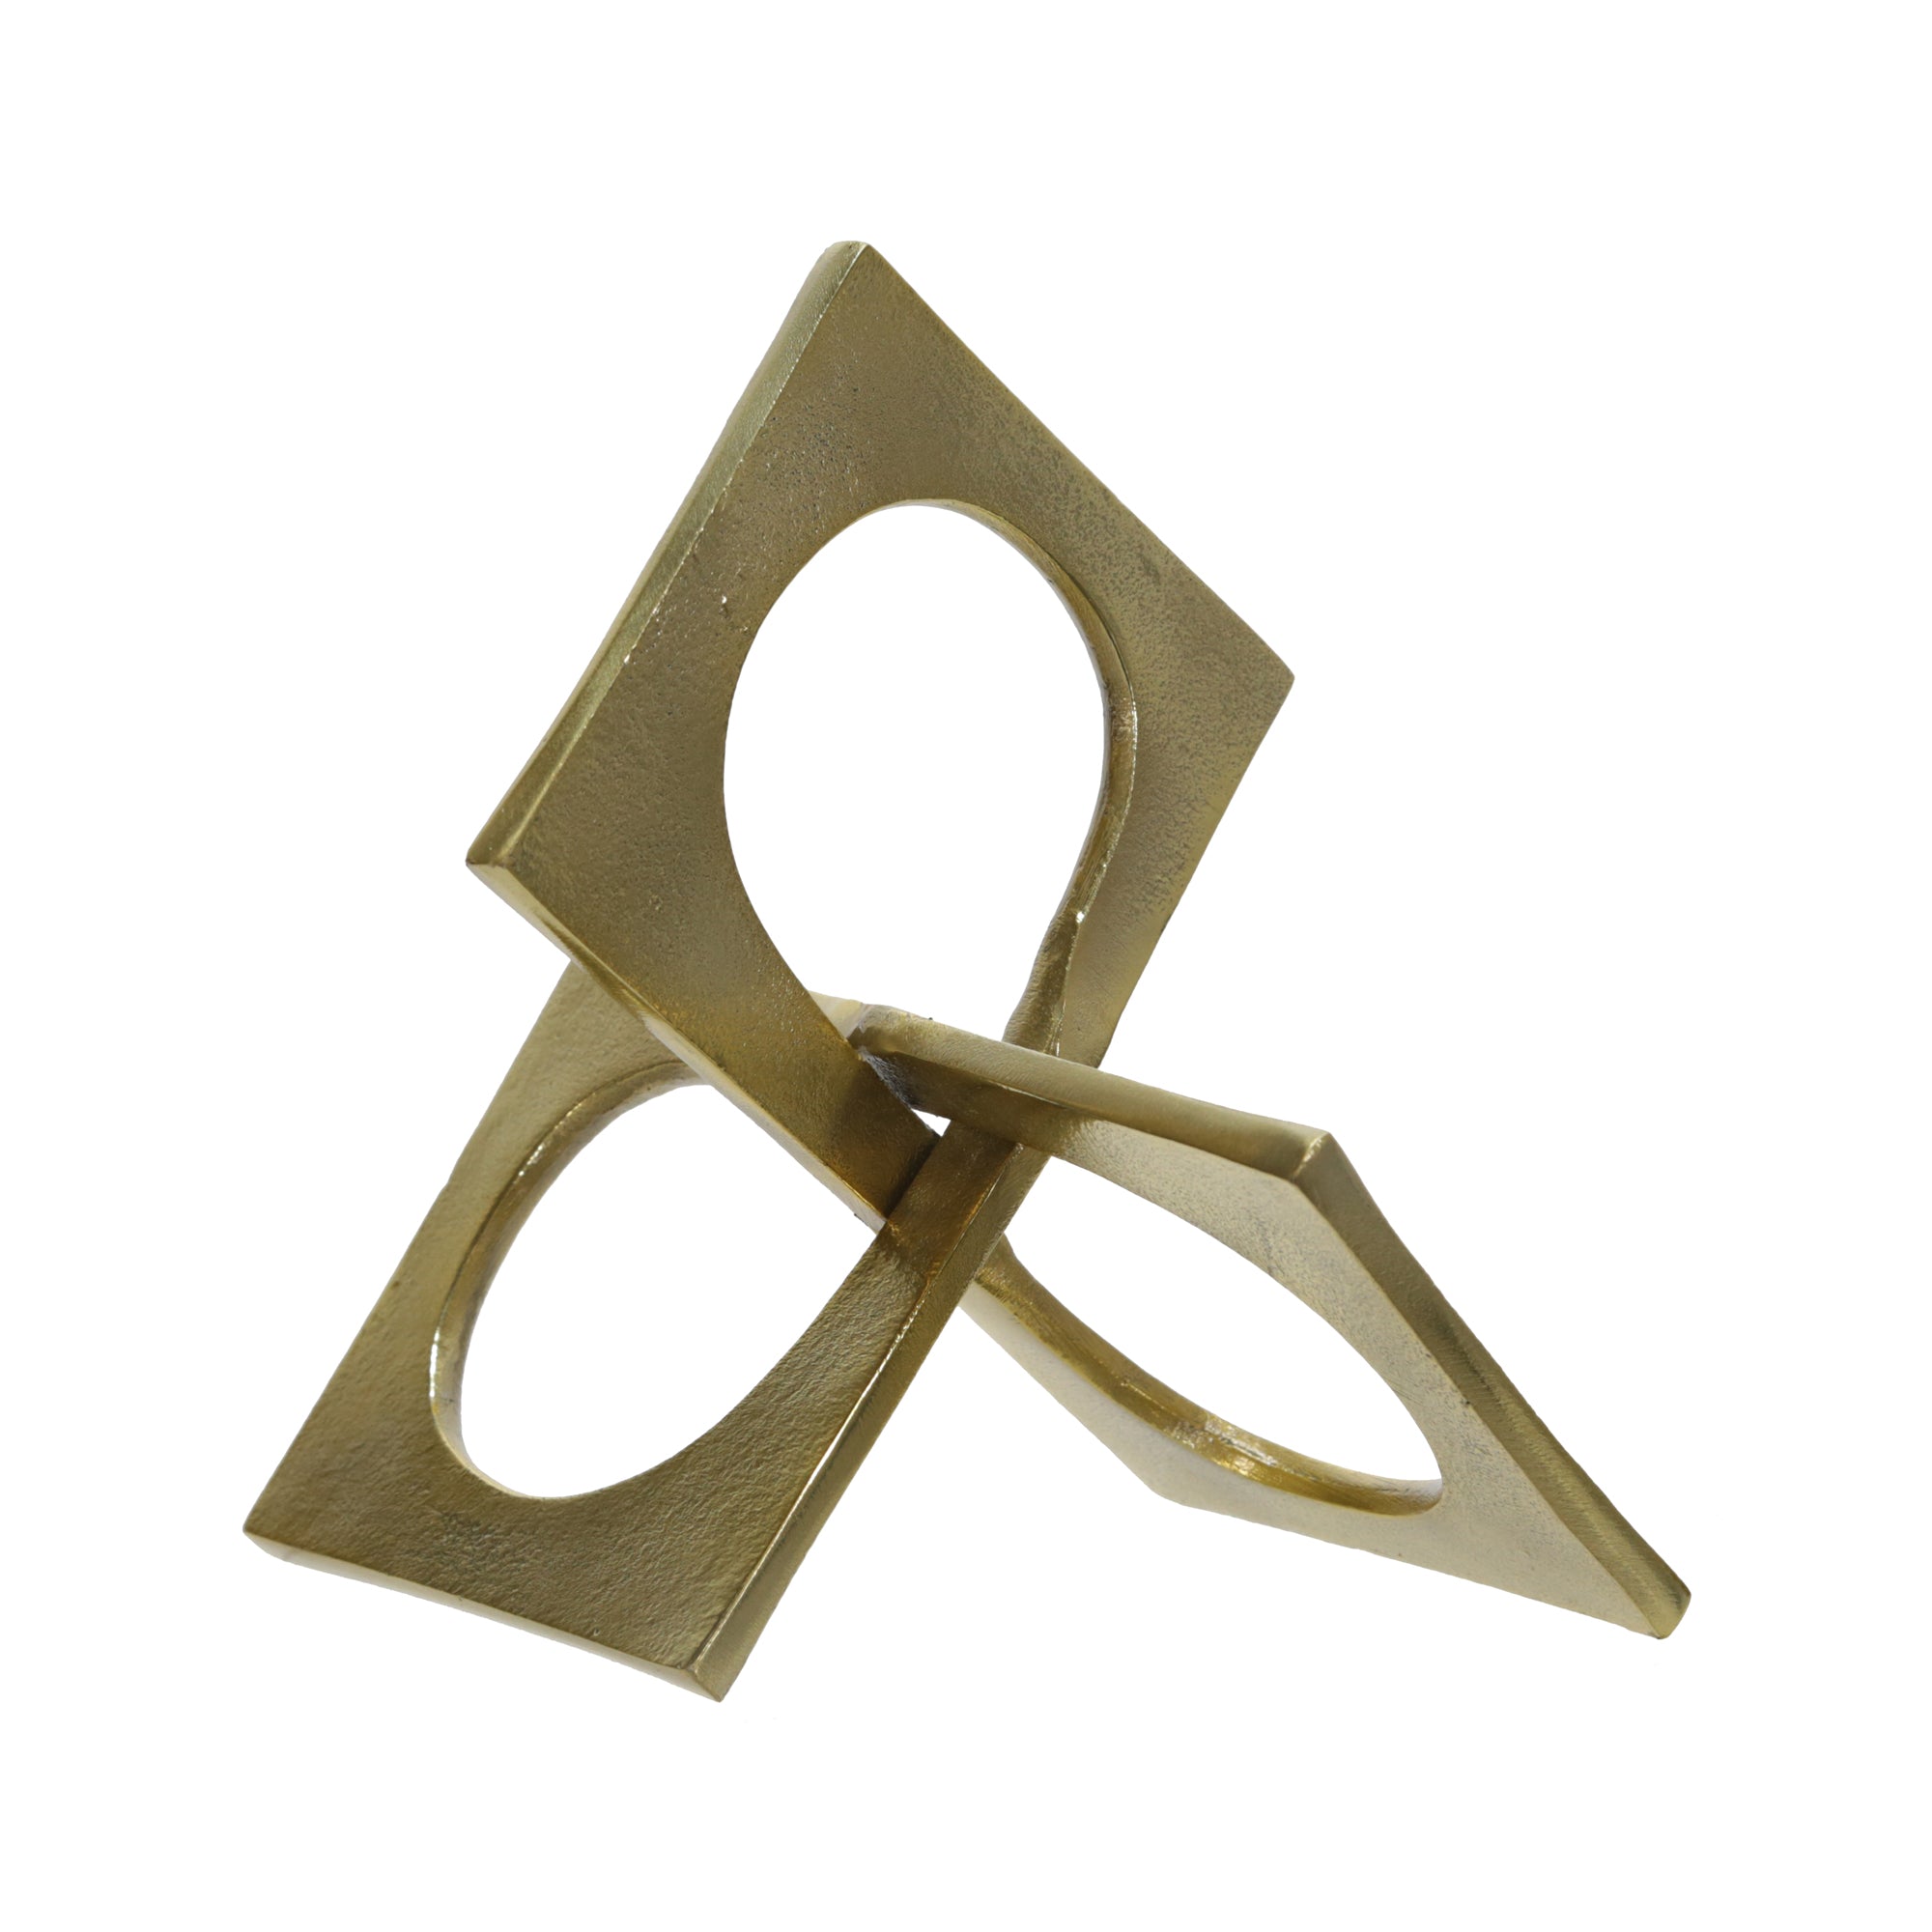 Linked Square - Gold